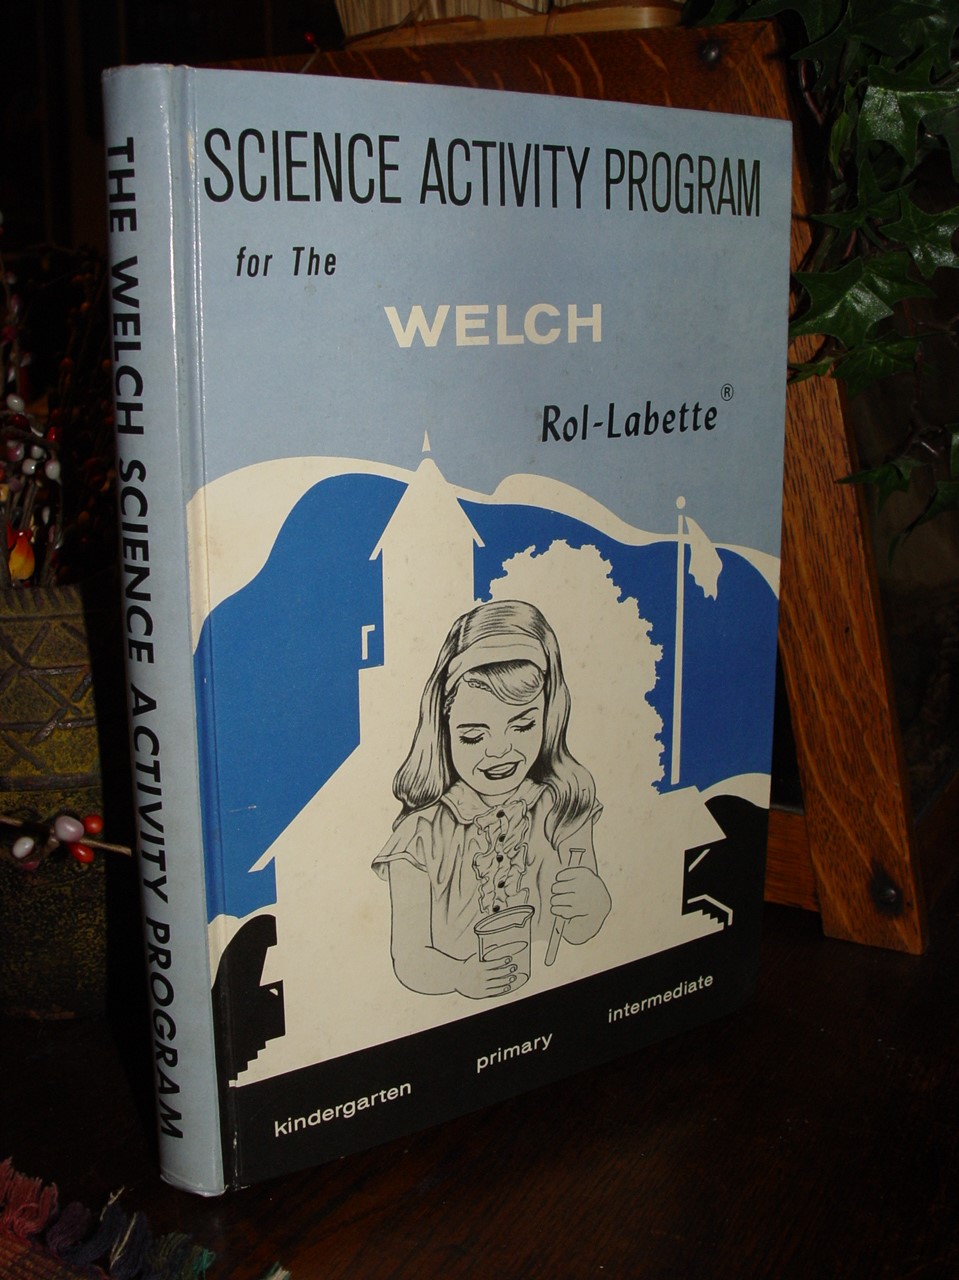 Science Activity Program For The WELCH
                        Rol-Labette Vintage 1964